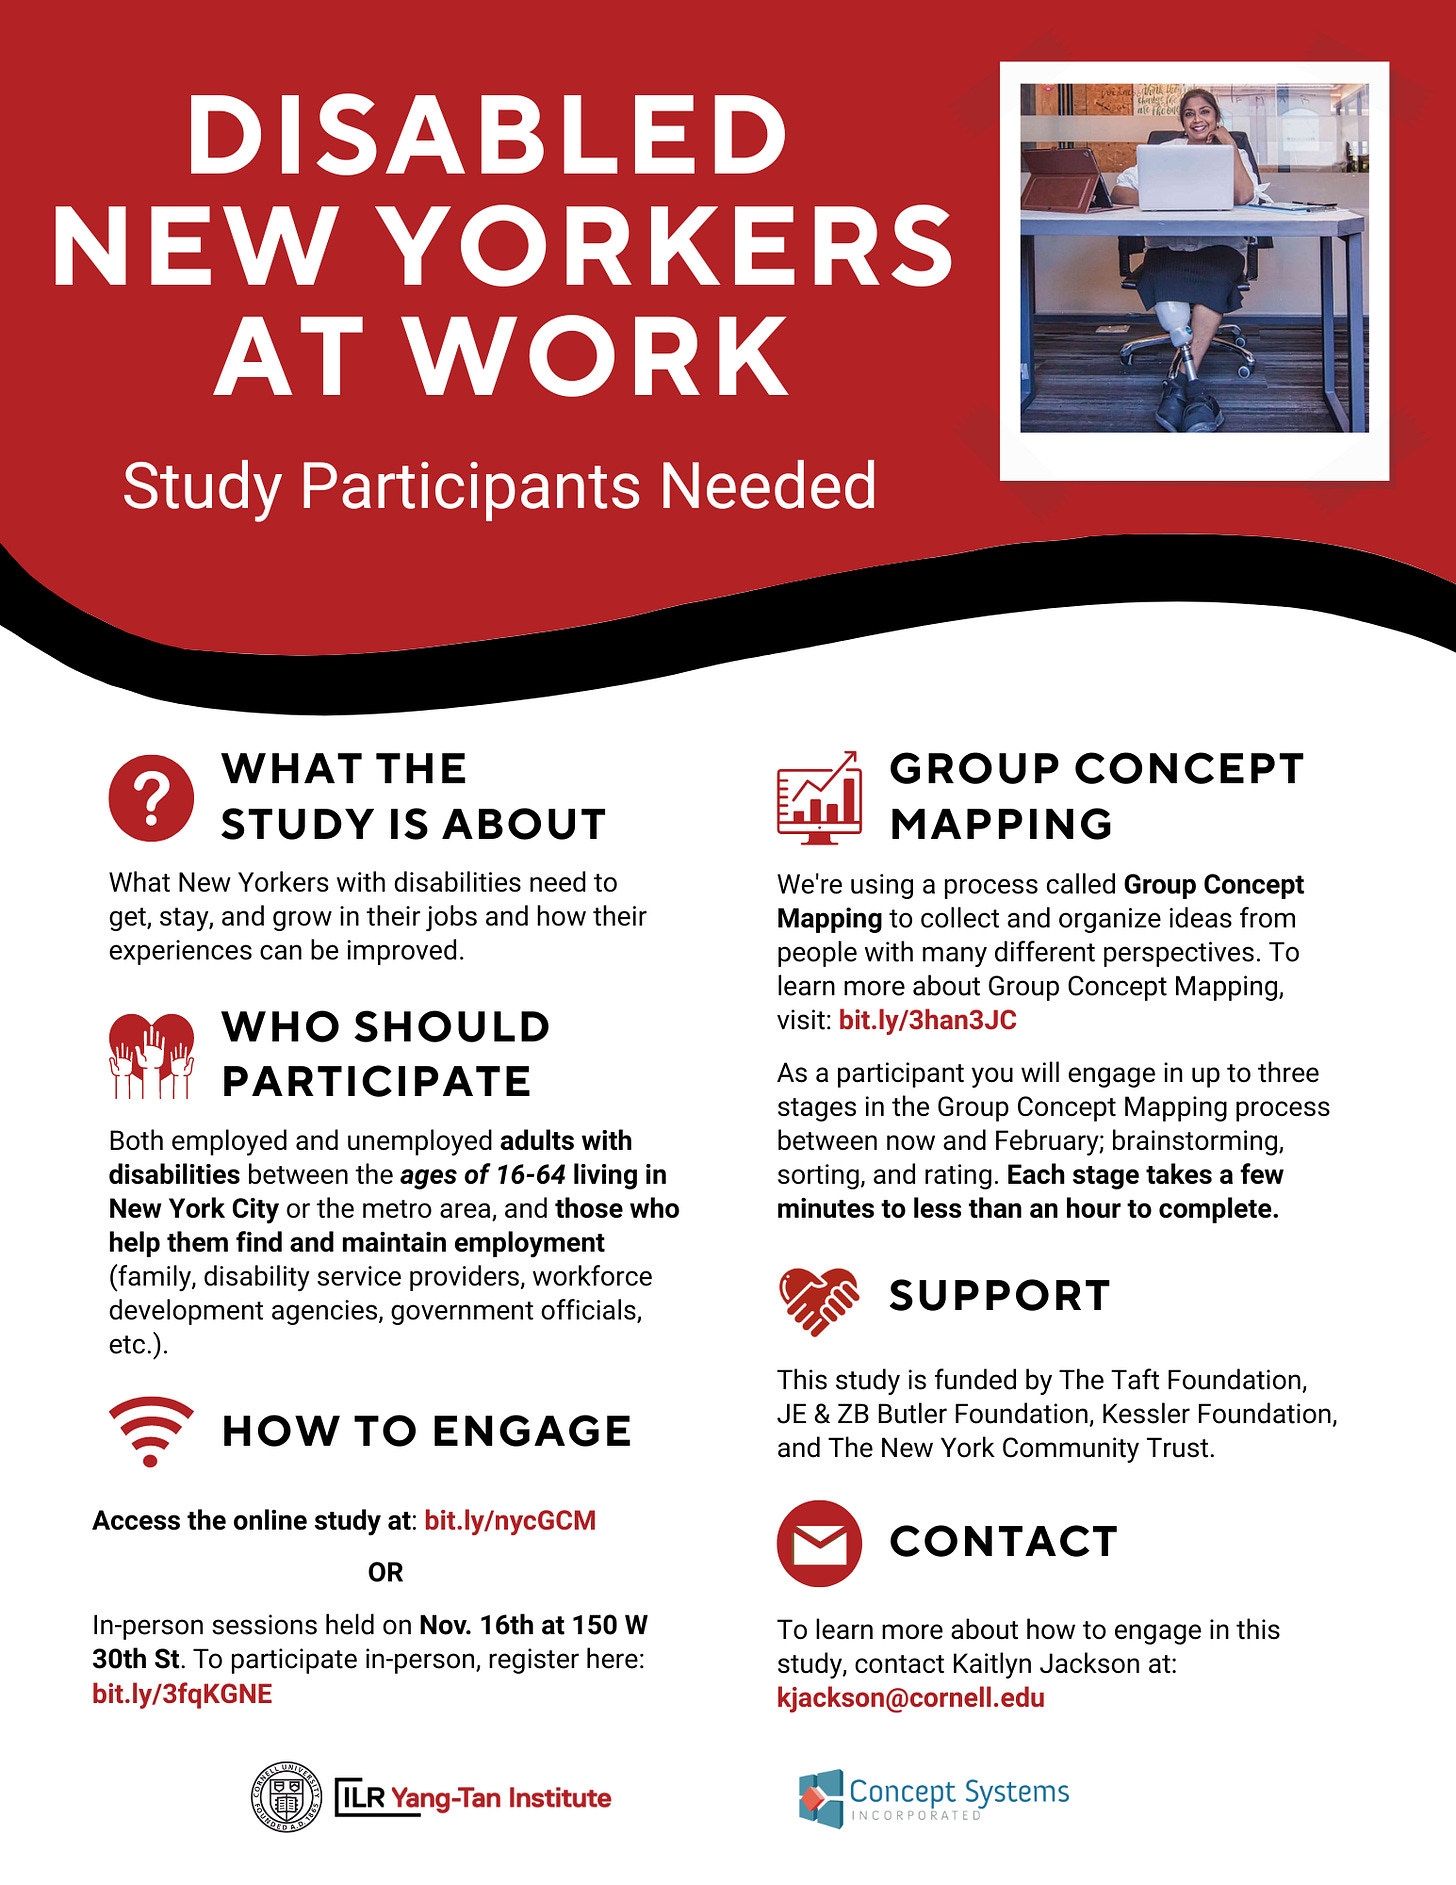 A flyer titled “Disabled New Yorkers at Work: Study Participants Needed.” There is a picture of a smiling person with a prosthetic leg sitting at a desk. The text reads: What the Study Is About: What New Yorkers with disabilities need to get, stay, and grow in their jobs and how their experiences can be improved. Who Should Participate: Both employed and unemployed adults with disabilities between the ages of 16-64 living in New York City or the metro area, and those who help them find and maintain employment (family, disability service providers, workforce development agencies, government officials, etc.). How to Engage: Access the online study at: bit.ly/nycGCM or in-person sessions held on Nov. 16th at 150 W 30th St. To participate in-person, register here: bit.ly/3fqKGNE. Group Concept Mapping: We're using a process called Group Concept Mapping to collect and organize ideas from people with many different perspectives. To learn more about Group Concept Mapping, visit: bit.ly/3han3JC. As a participant you will engage in up to three stages in the Group Concept Mapping process between now and February; brainstorming, sorting, and rating. Each stage takes a few minutes to less than an hour to complete. Support: This study is funded by The Taft Foundation, JE & ZB Butler Foundation, Kessler Foundation, and The New York Community Trust. Contact: To learn more about how to engage in this study, contact Kaitlyn Jackson at: kjackson@cornell.edu. There are two logos at the bottom of the flyer, for the Yang-Tan Institute at Cornell University, and for Concept Systems Incorporated.